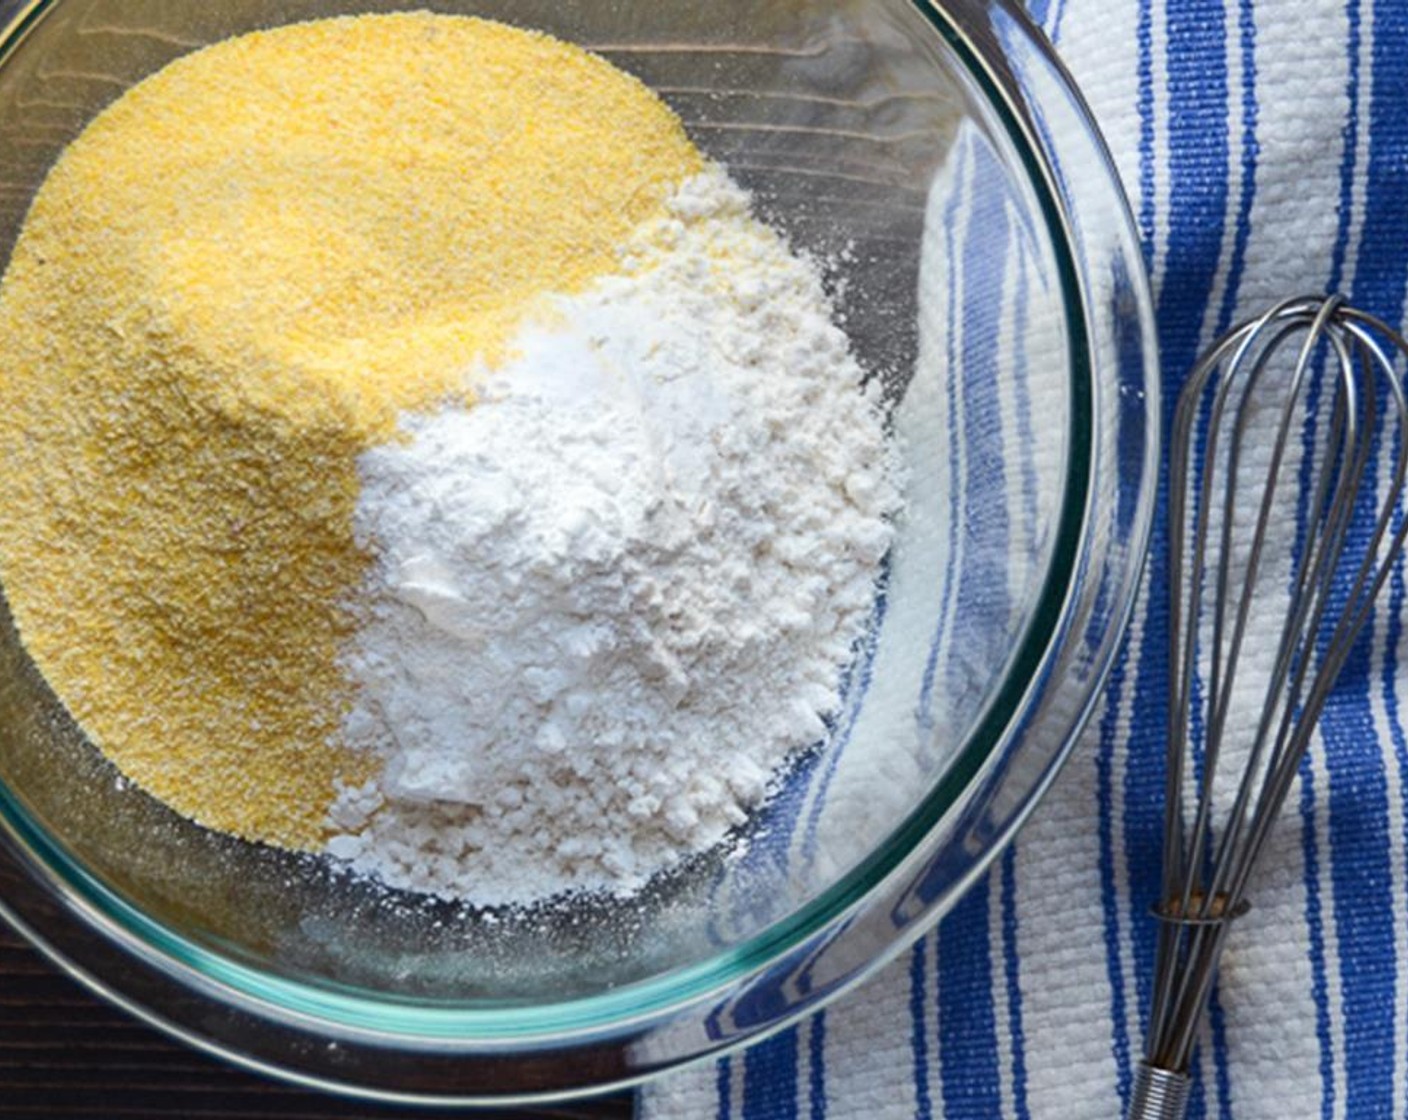 step 5 In a large bowl, whisk together the All-Purpose Flour (1 1/2 cups), Cornmeal (1 cup), Baking Powder (1/2 Tbsp), Baking Soda (1/4 tsp) and Salt (3/4 tsp). Set aside.